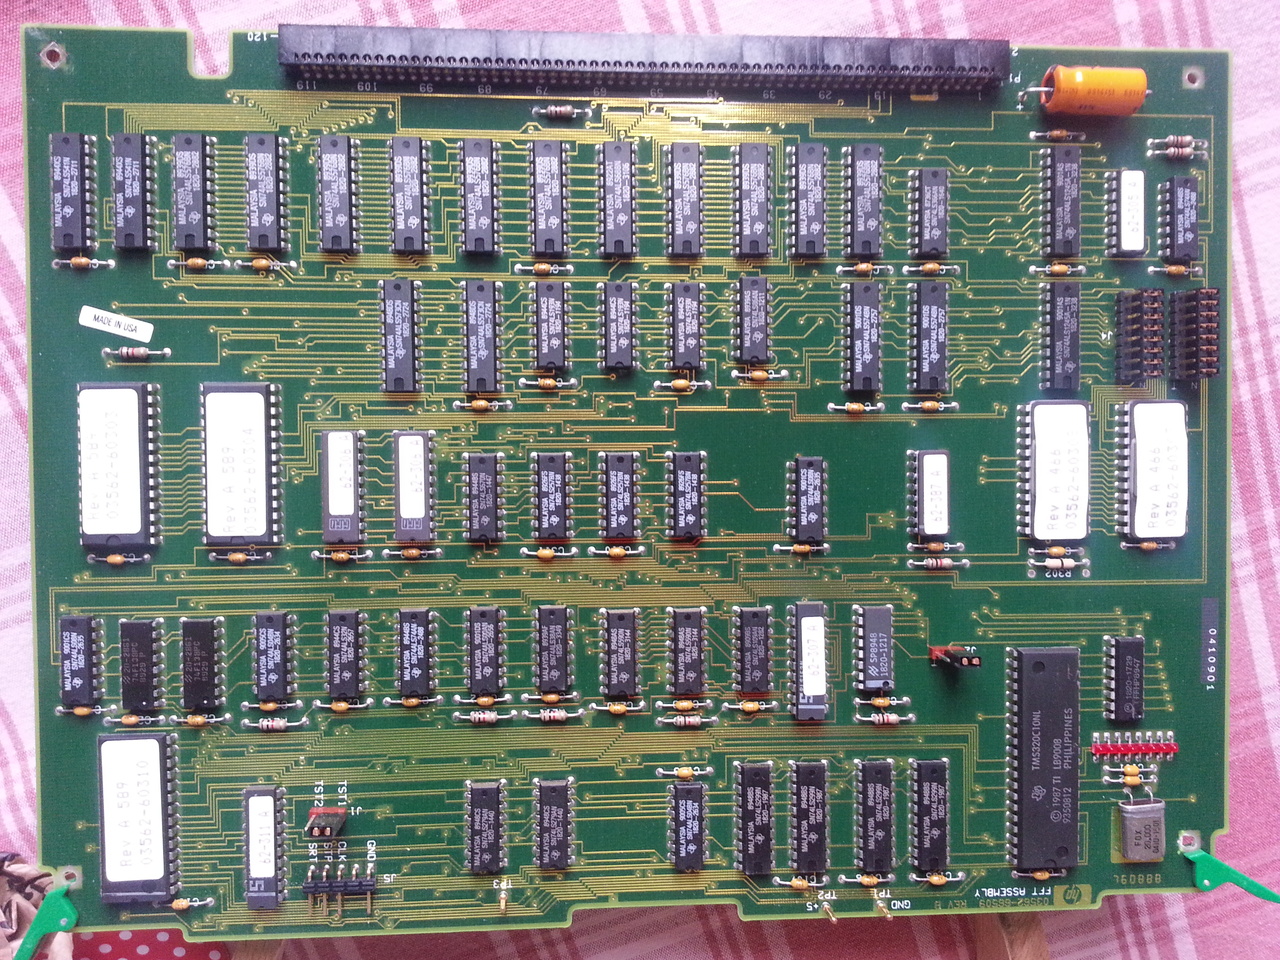 Picture of the A9 FFT board of the HP3562A